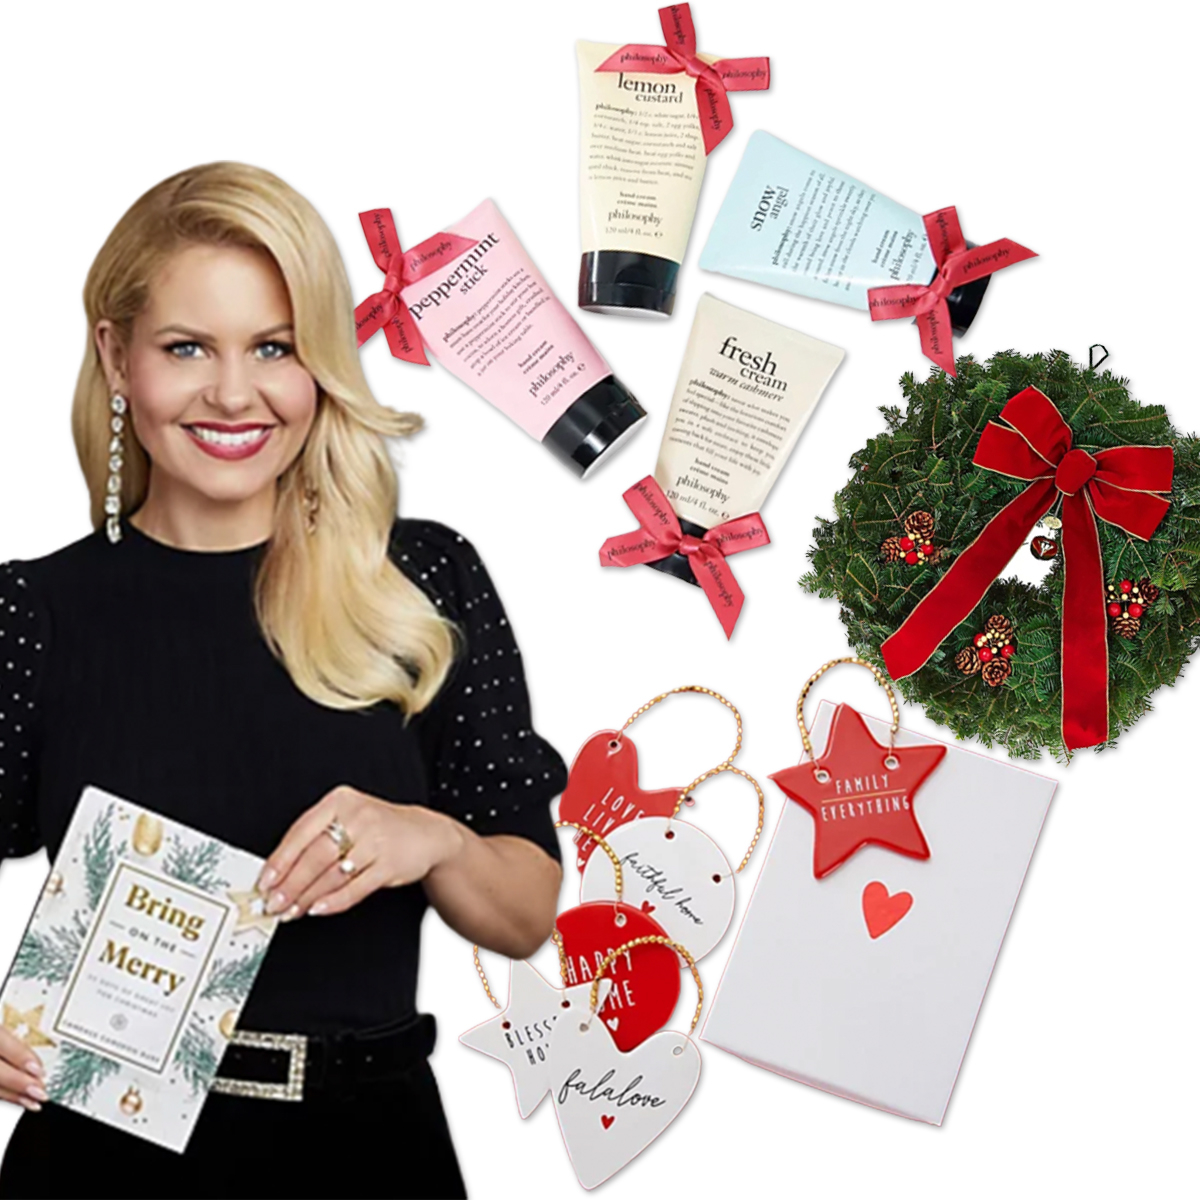 Martha Stewart’s $32 Tree and More Christmas in July Gifts to Buy Now